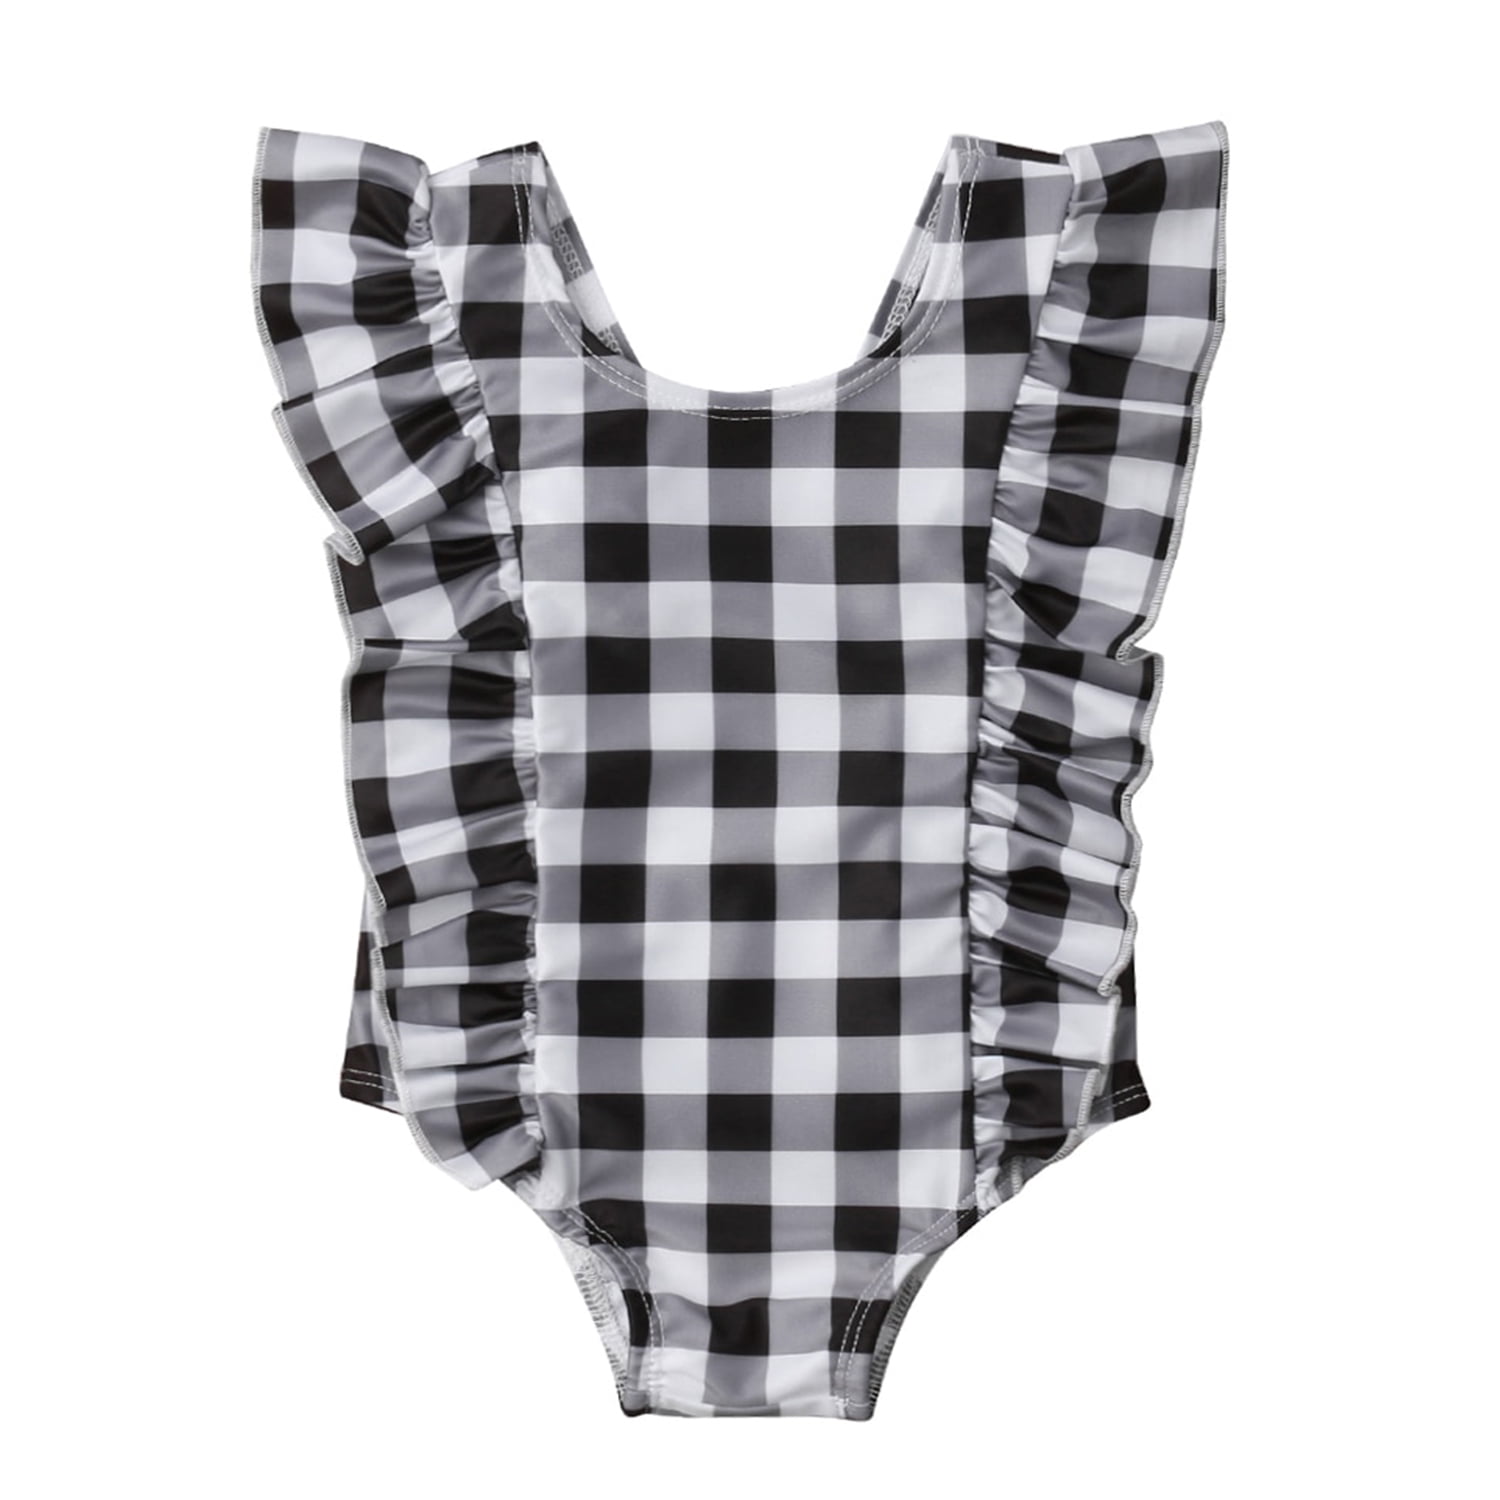 Styles I Love Infant Baby Girl Cute Printed One-Piece Swimsuit Beach Bathing Suit Pool Swimwear 